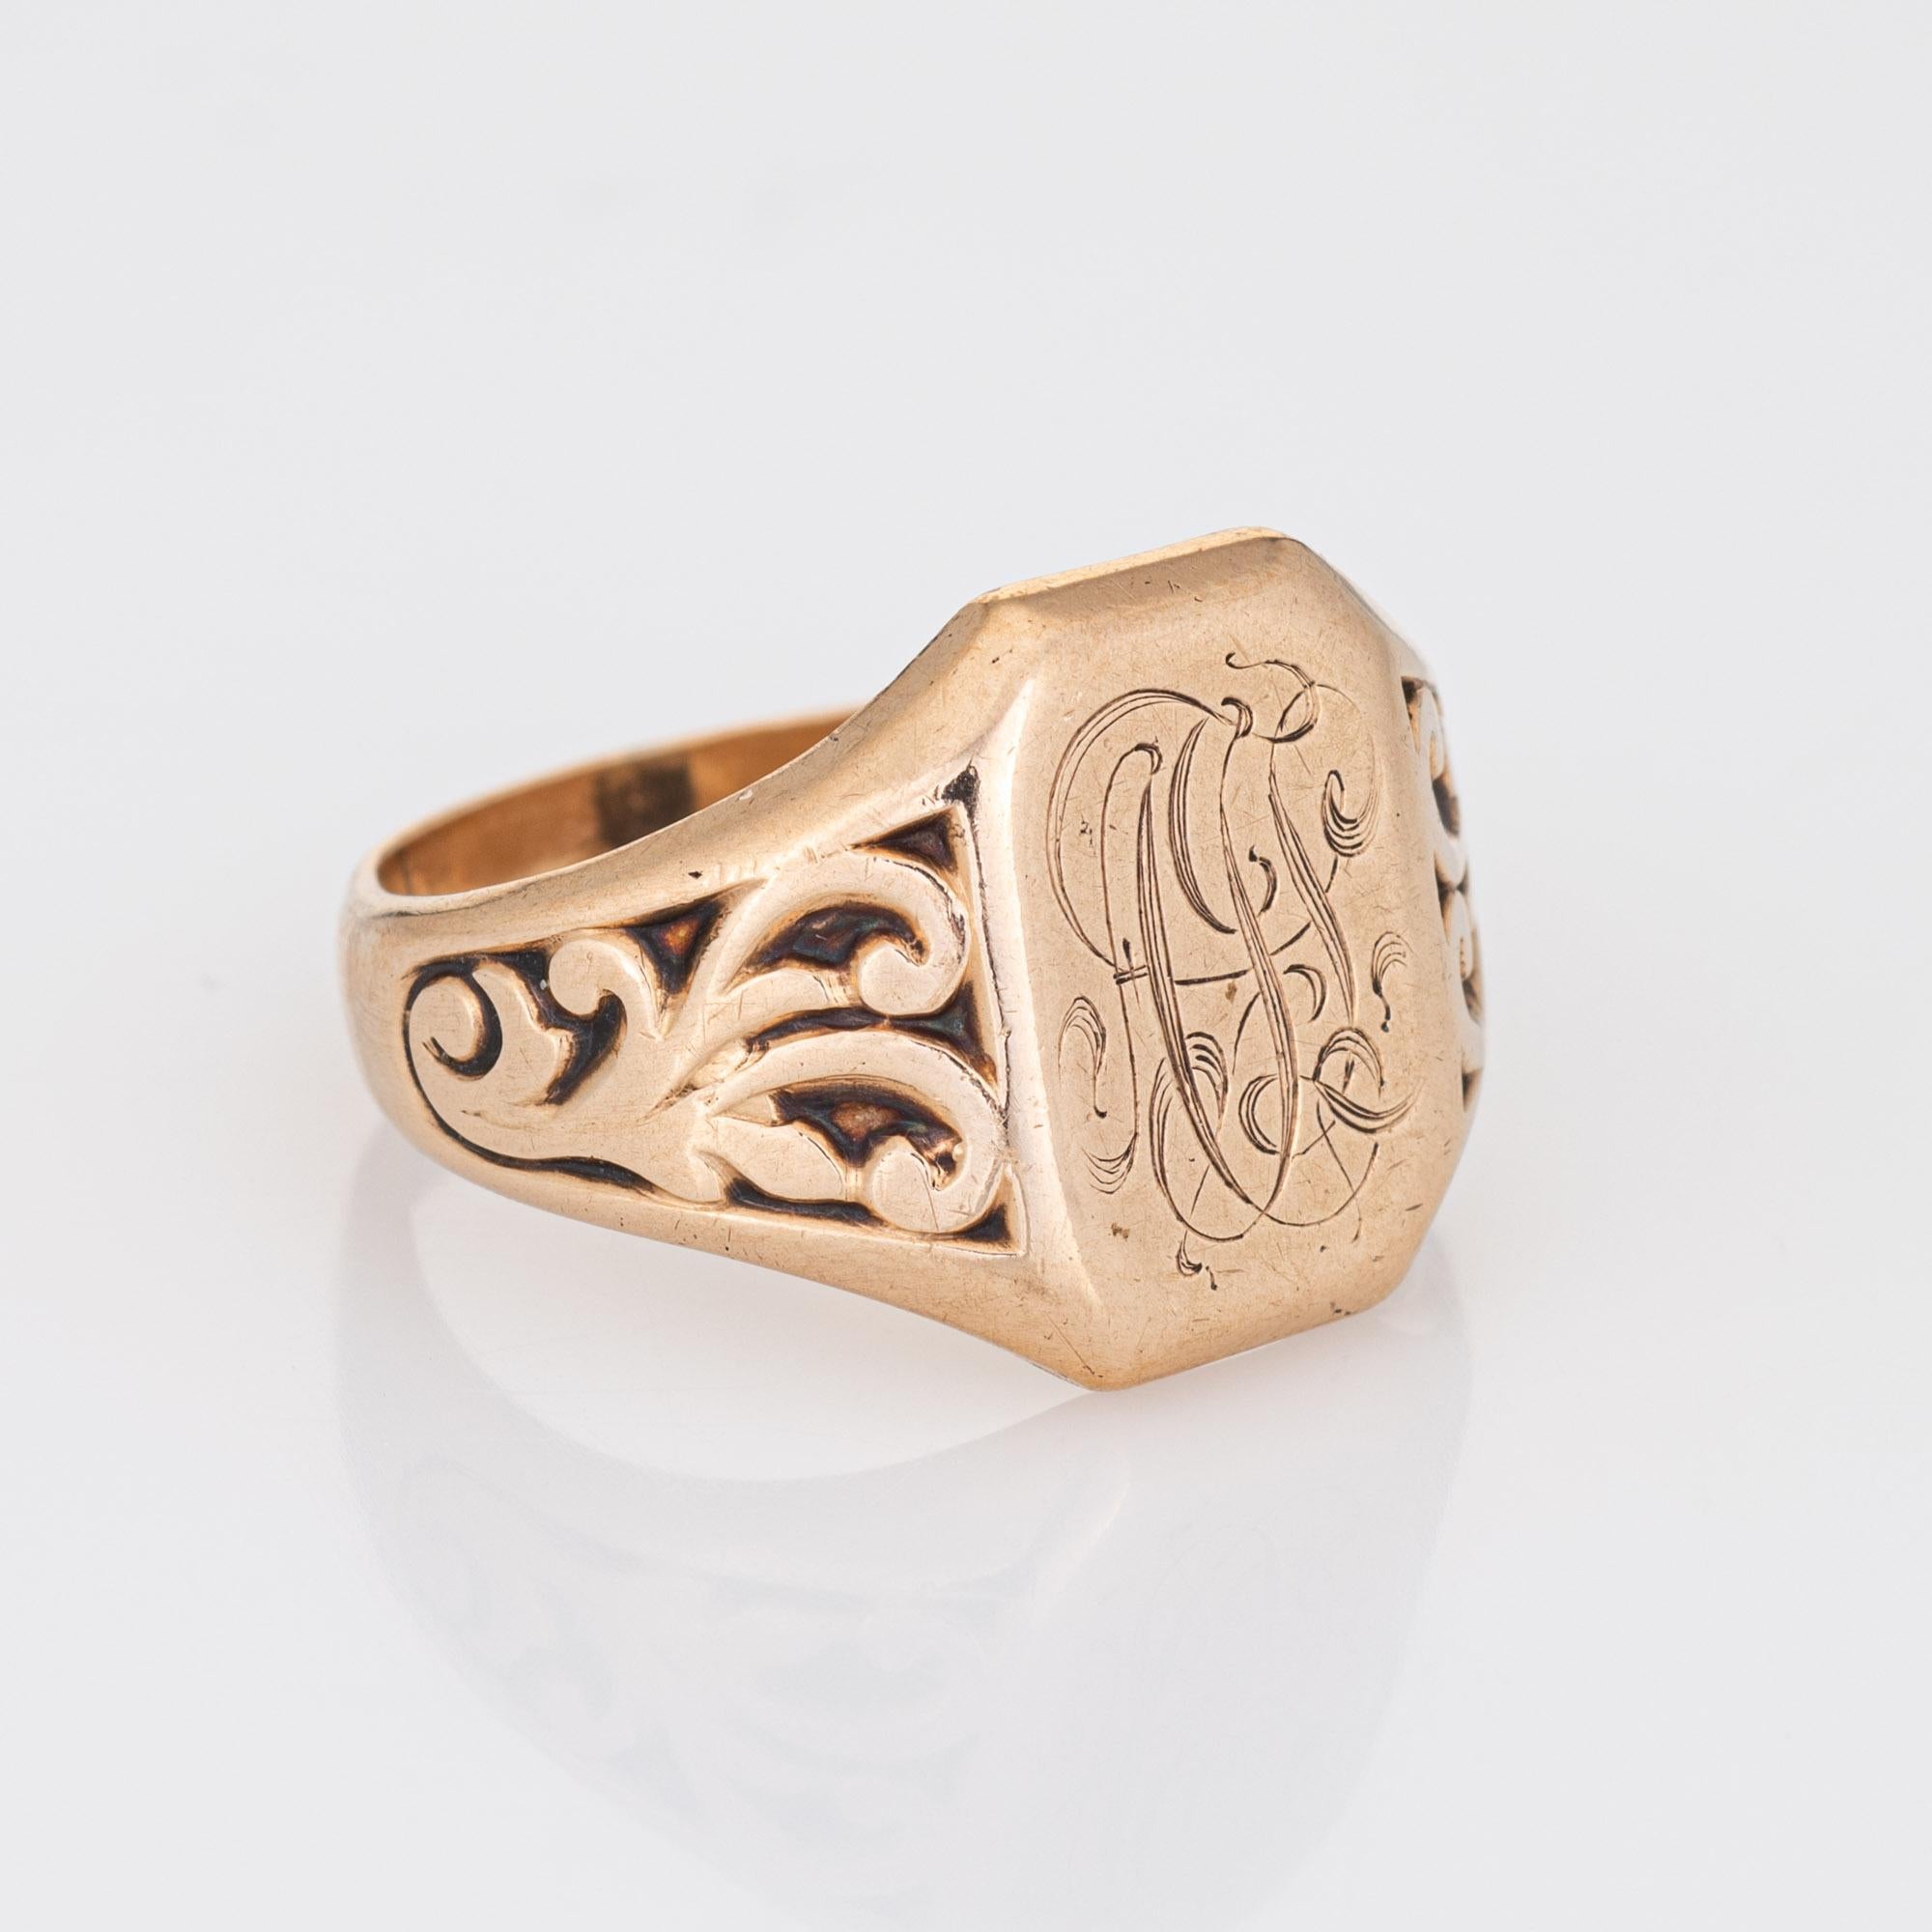 Vintage Art Deco Signet Ring Square 10k Rose Gold Sz 8.25 Fine Jewelry In Good Condition For Sale In Torrance, CA